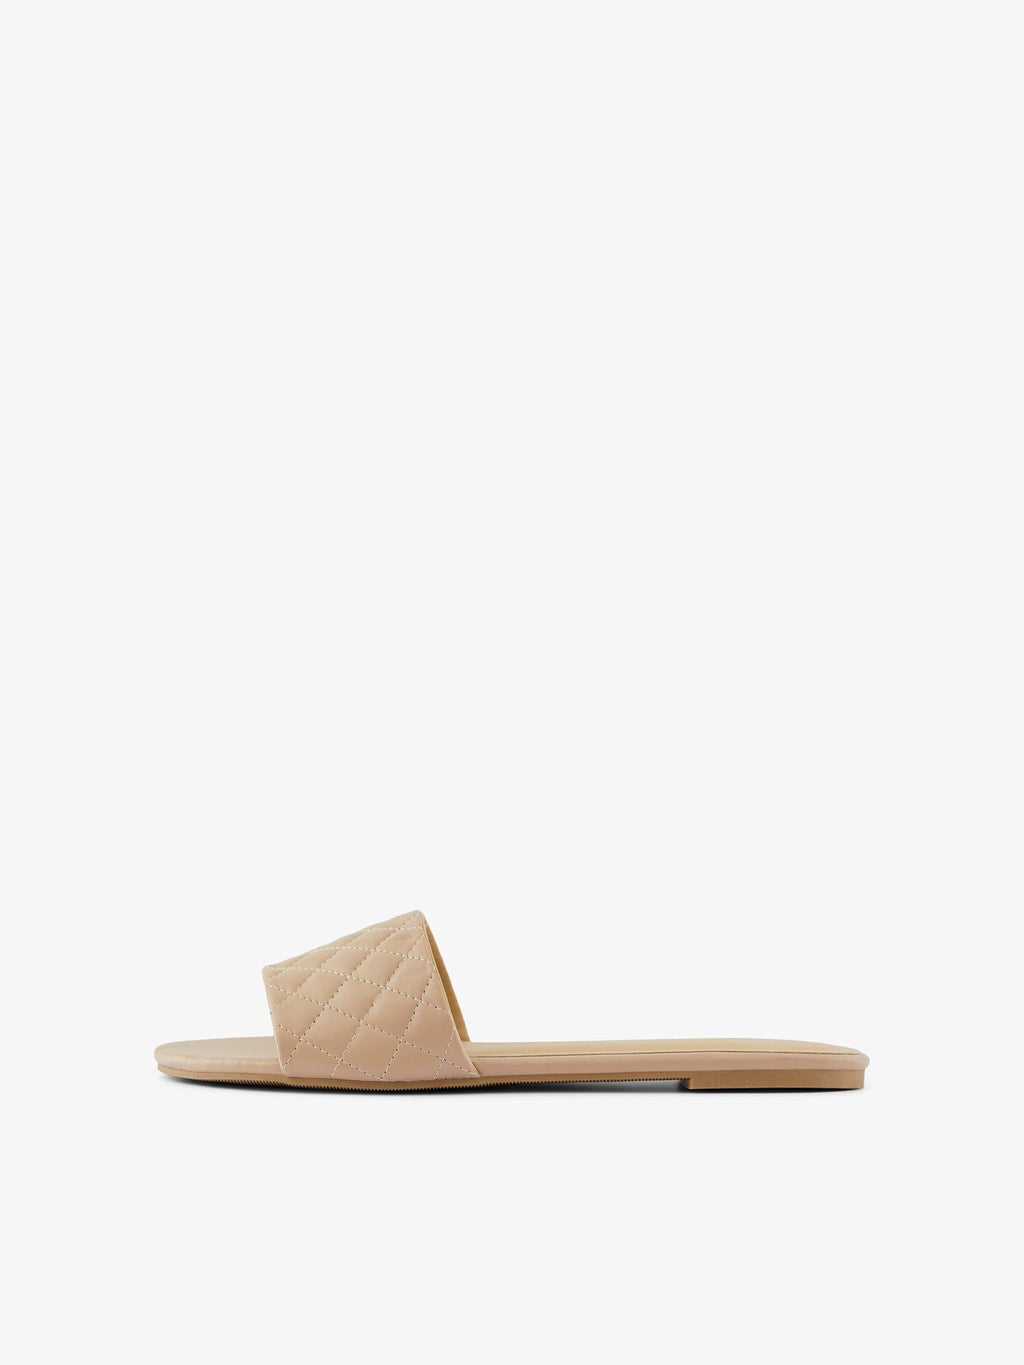 Pernille Quilted Sandal - Beige